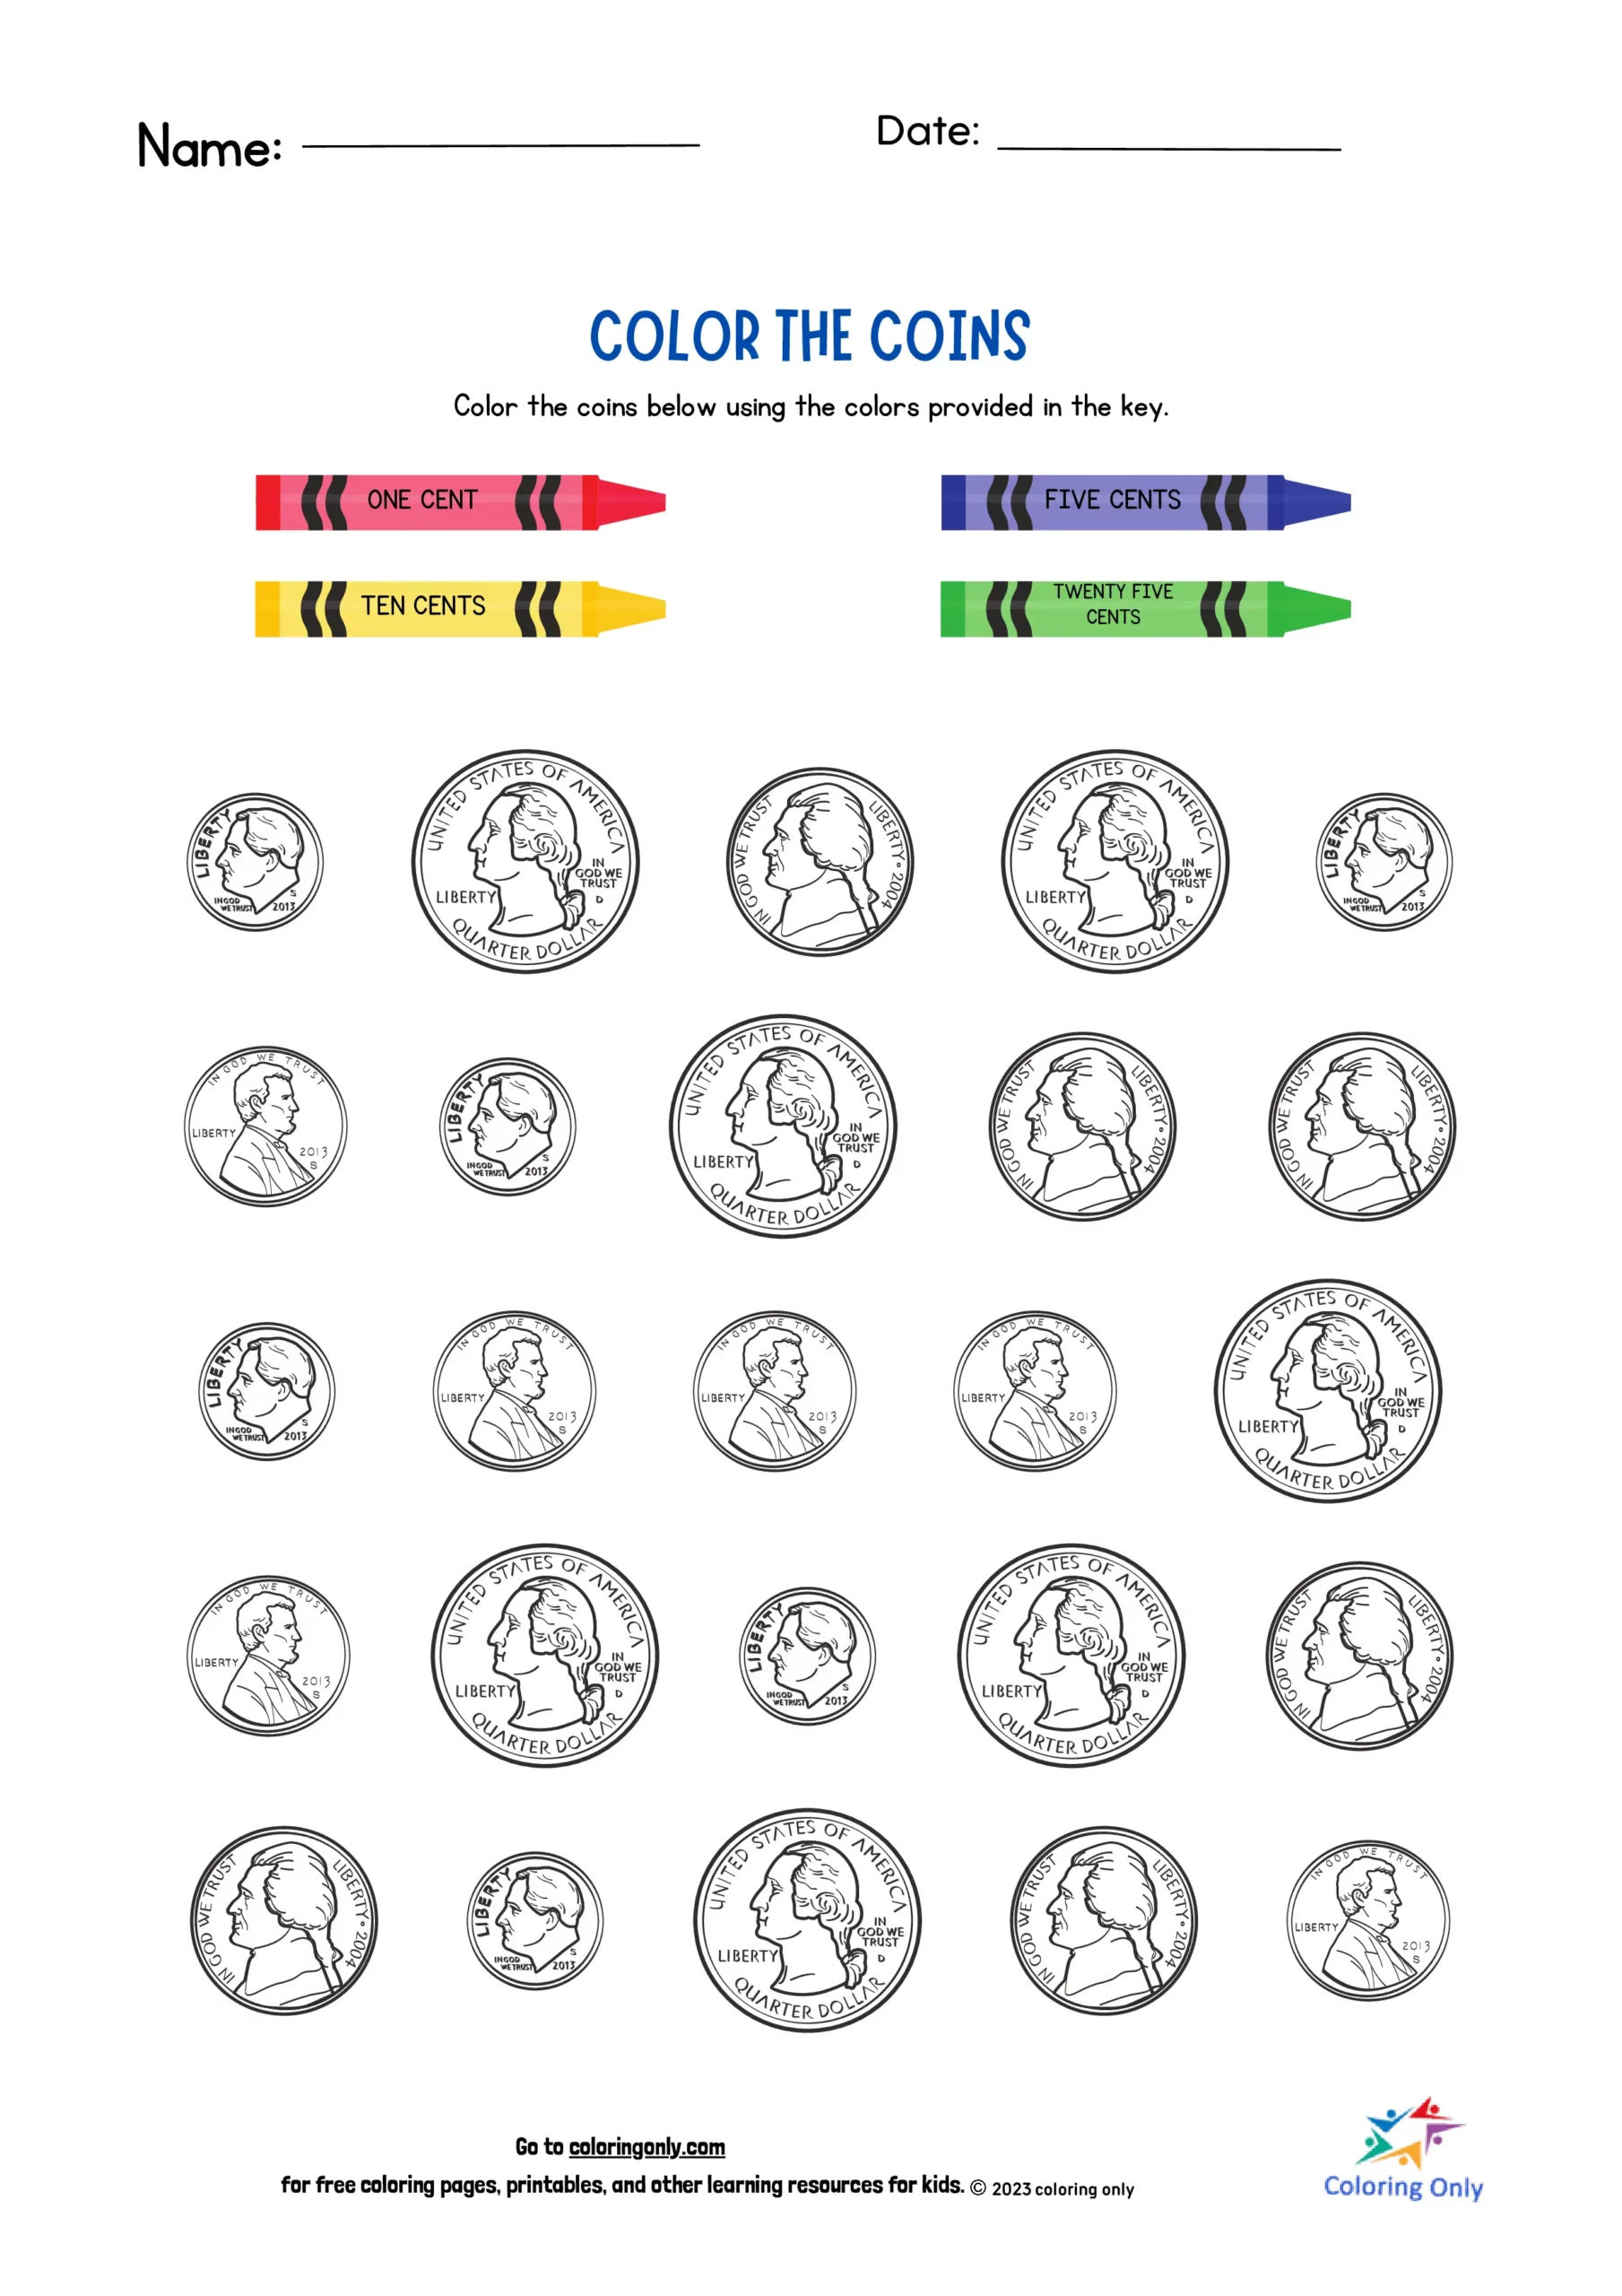 Color the Coins